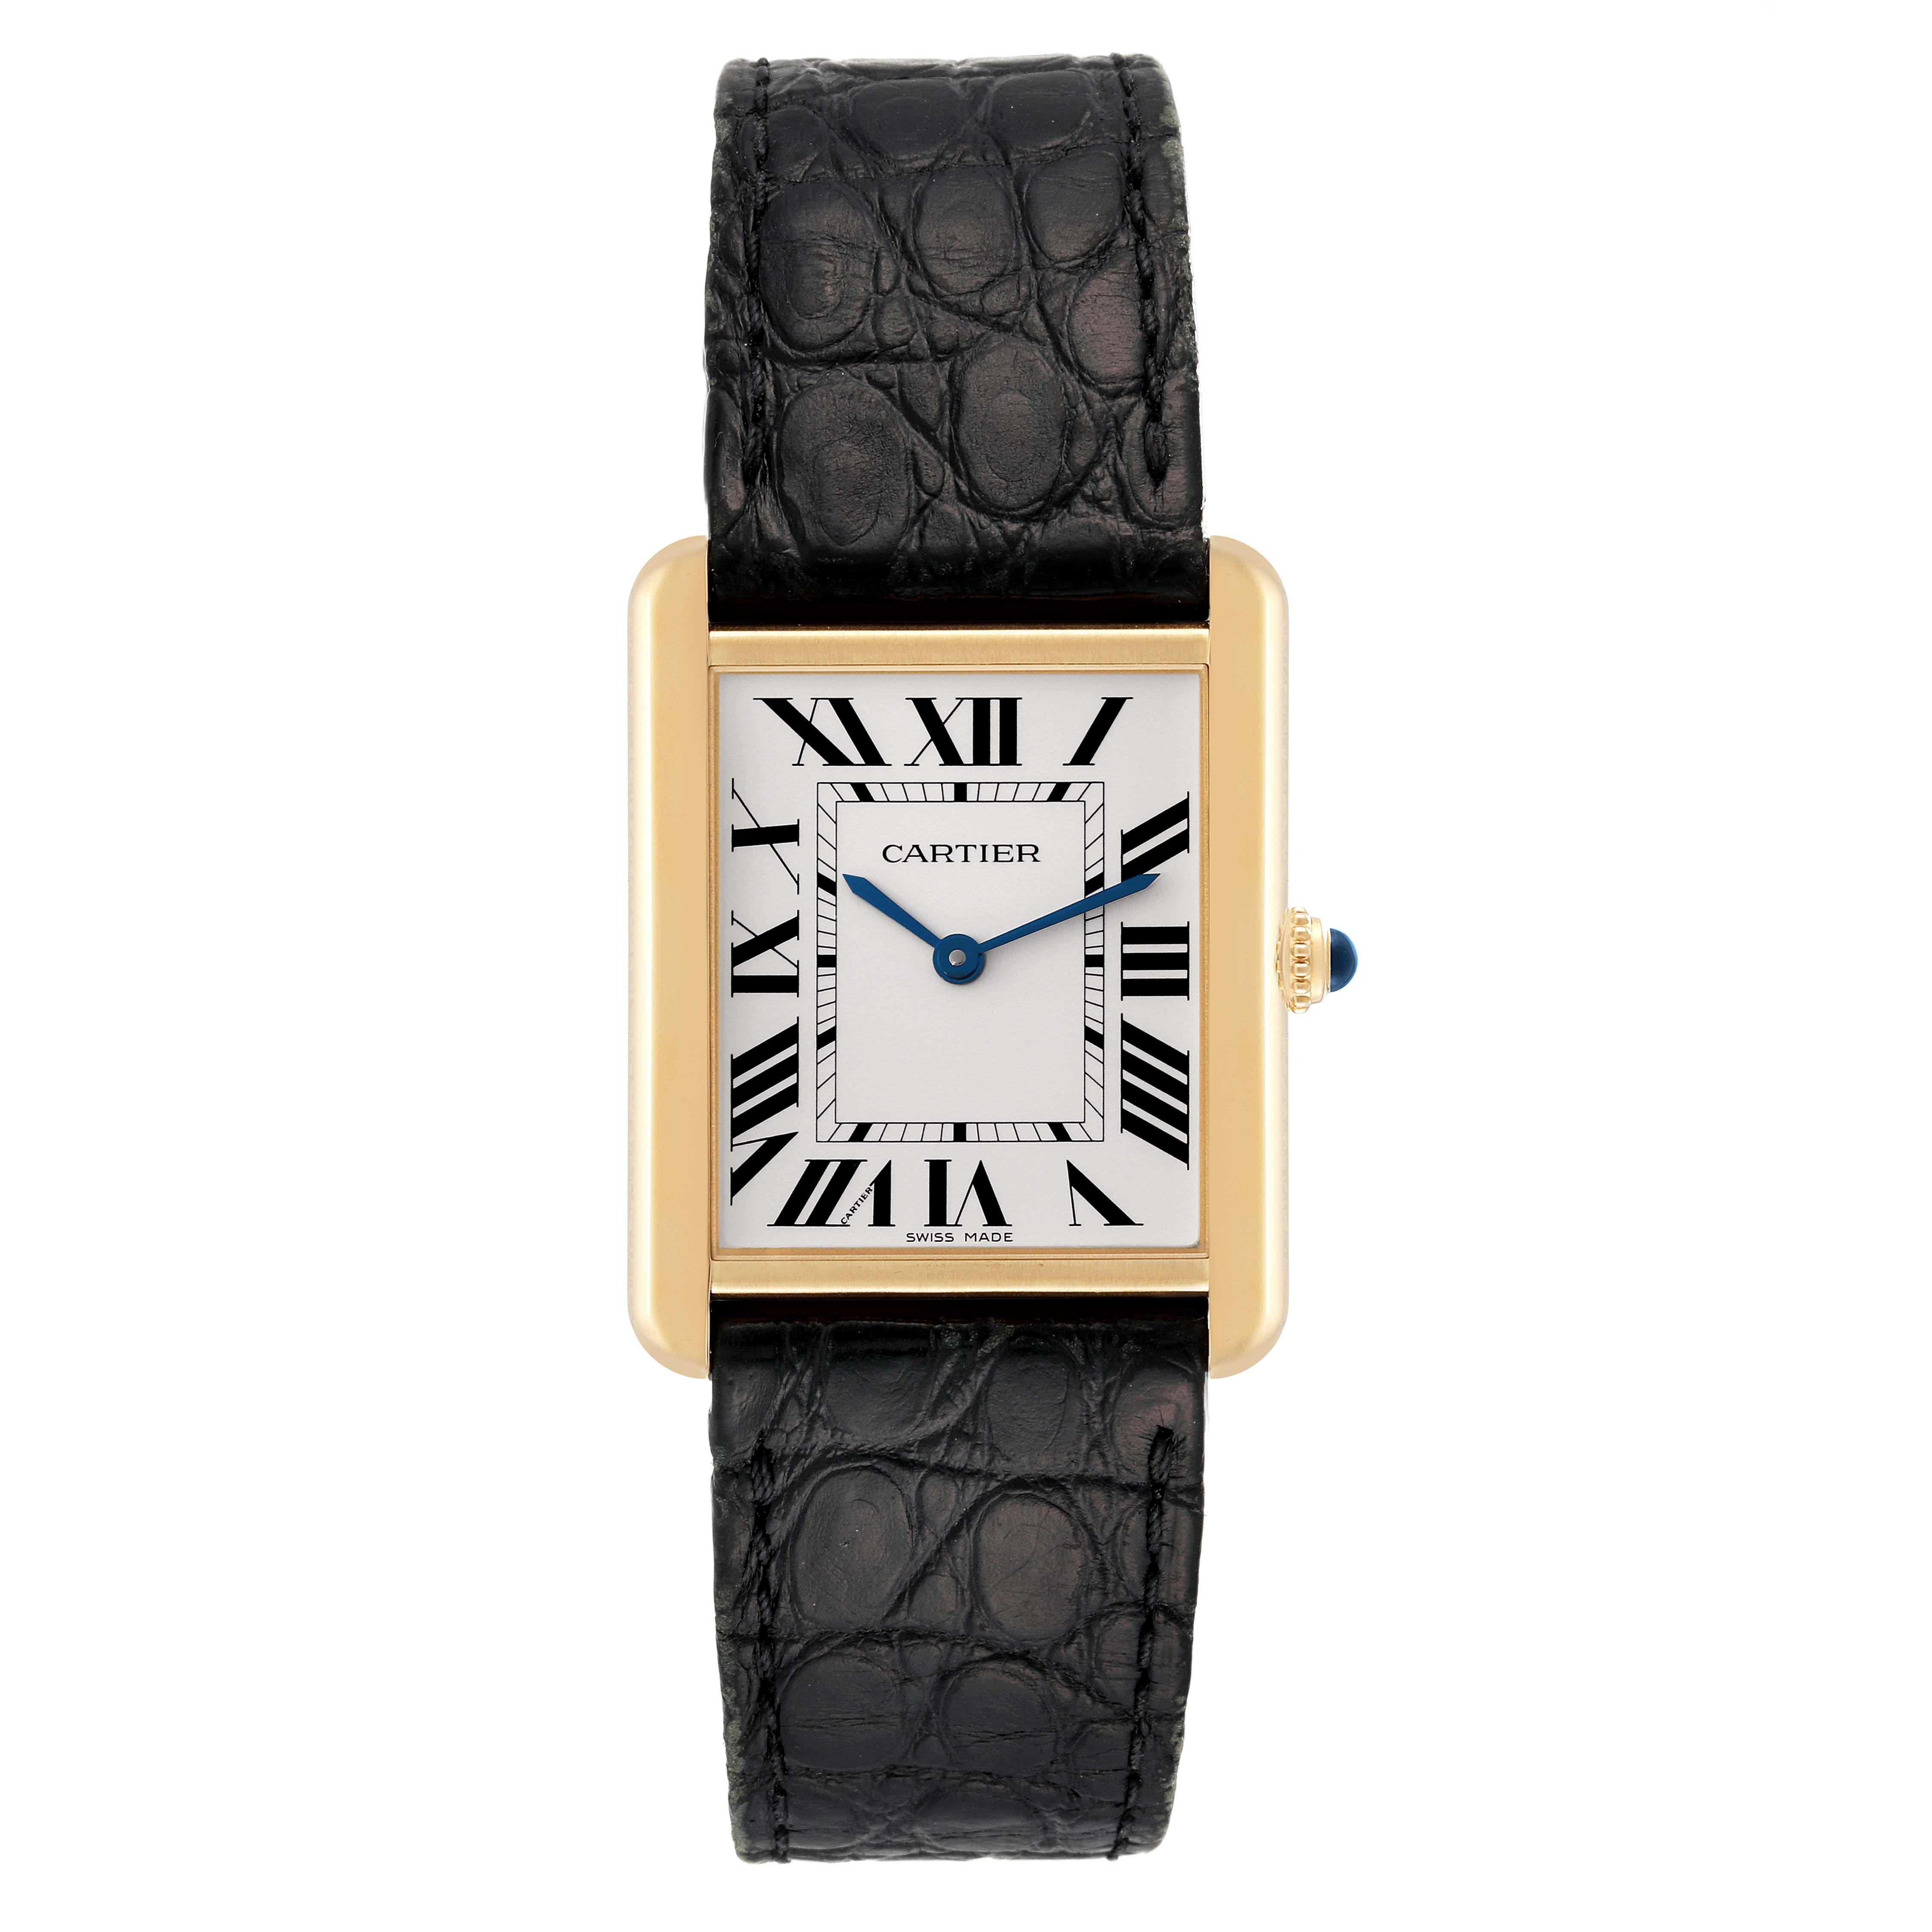 Cartier Tank Solo Large Yellow Gold Steel Mens Watch W5200004 Papers. Quartz movement. 18k yellow gold case 34 mm x 27 mm. Stainless steel case back. Circular grained crown set with a blue spinel cabochon. . Scratch resistant sapphire crystal.